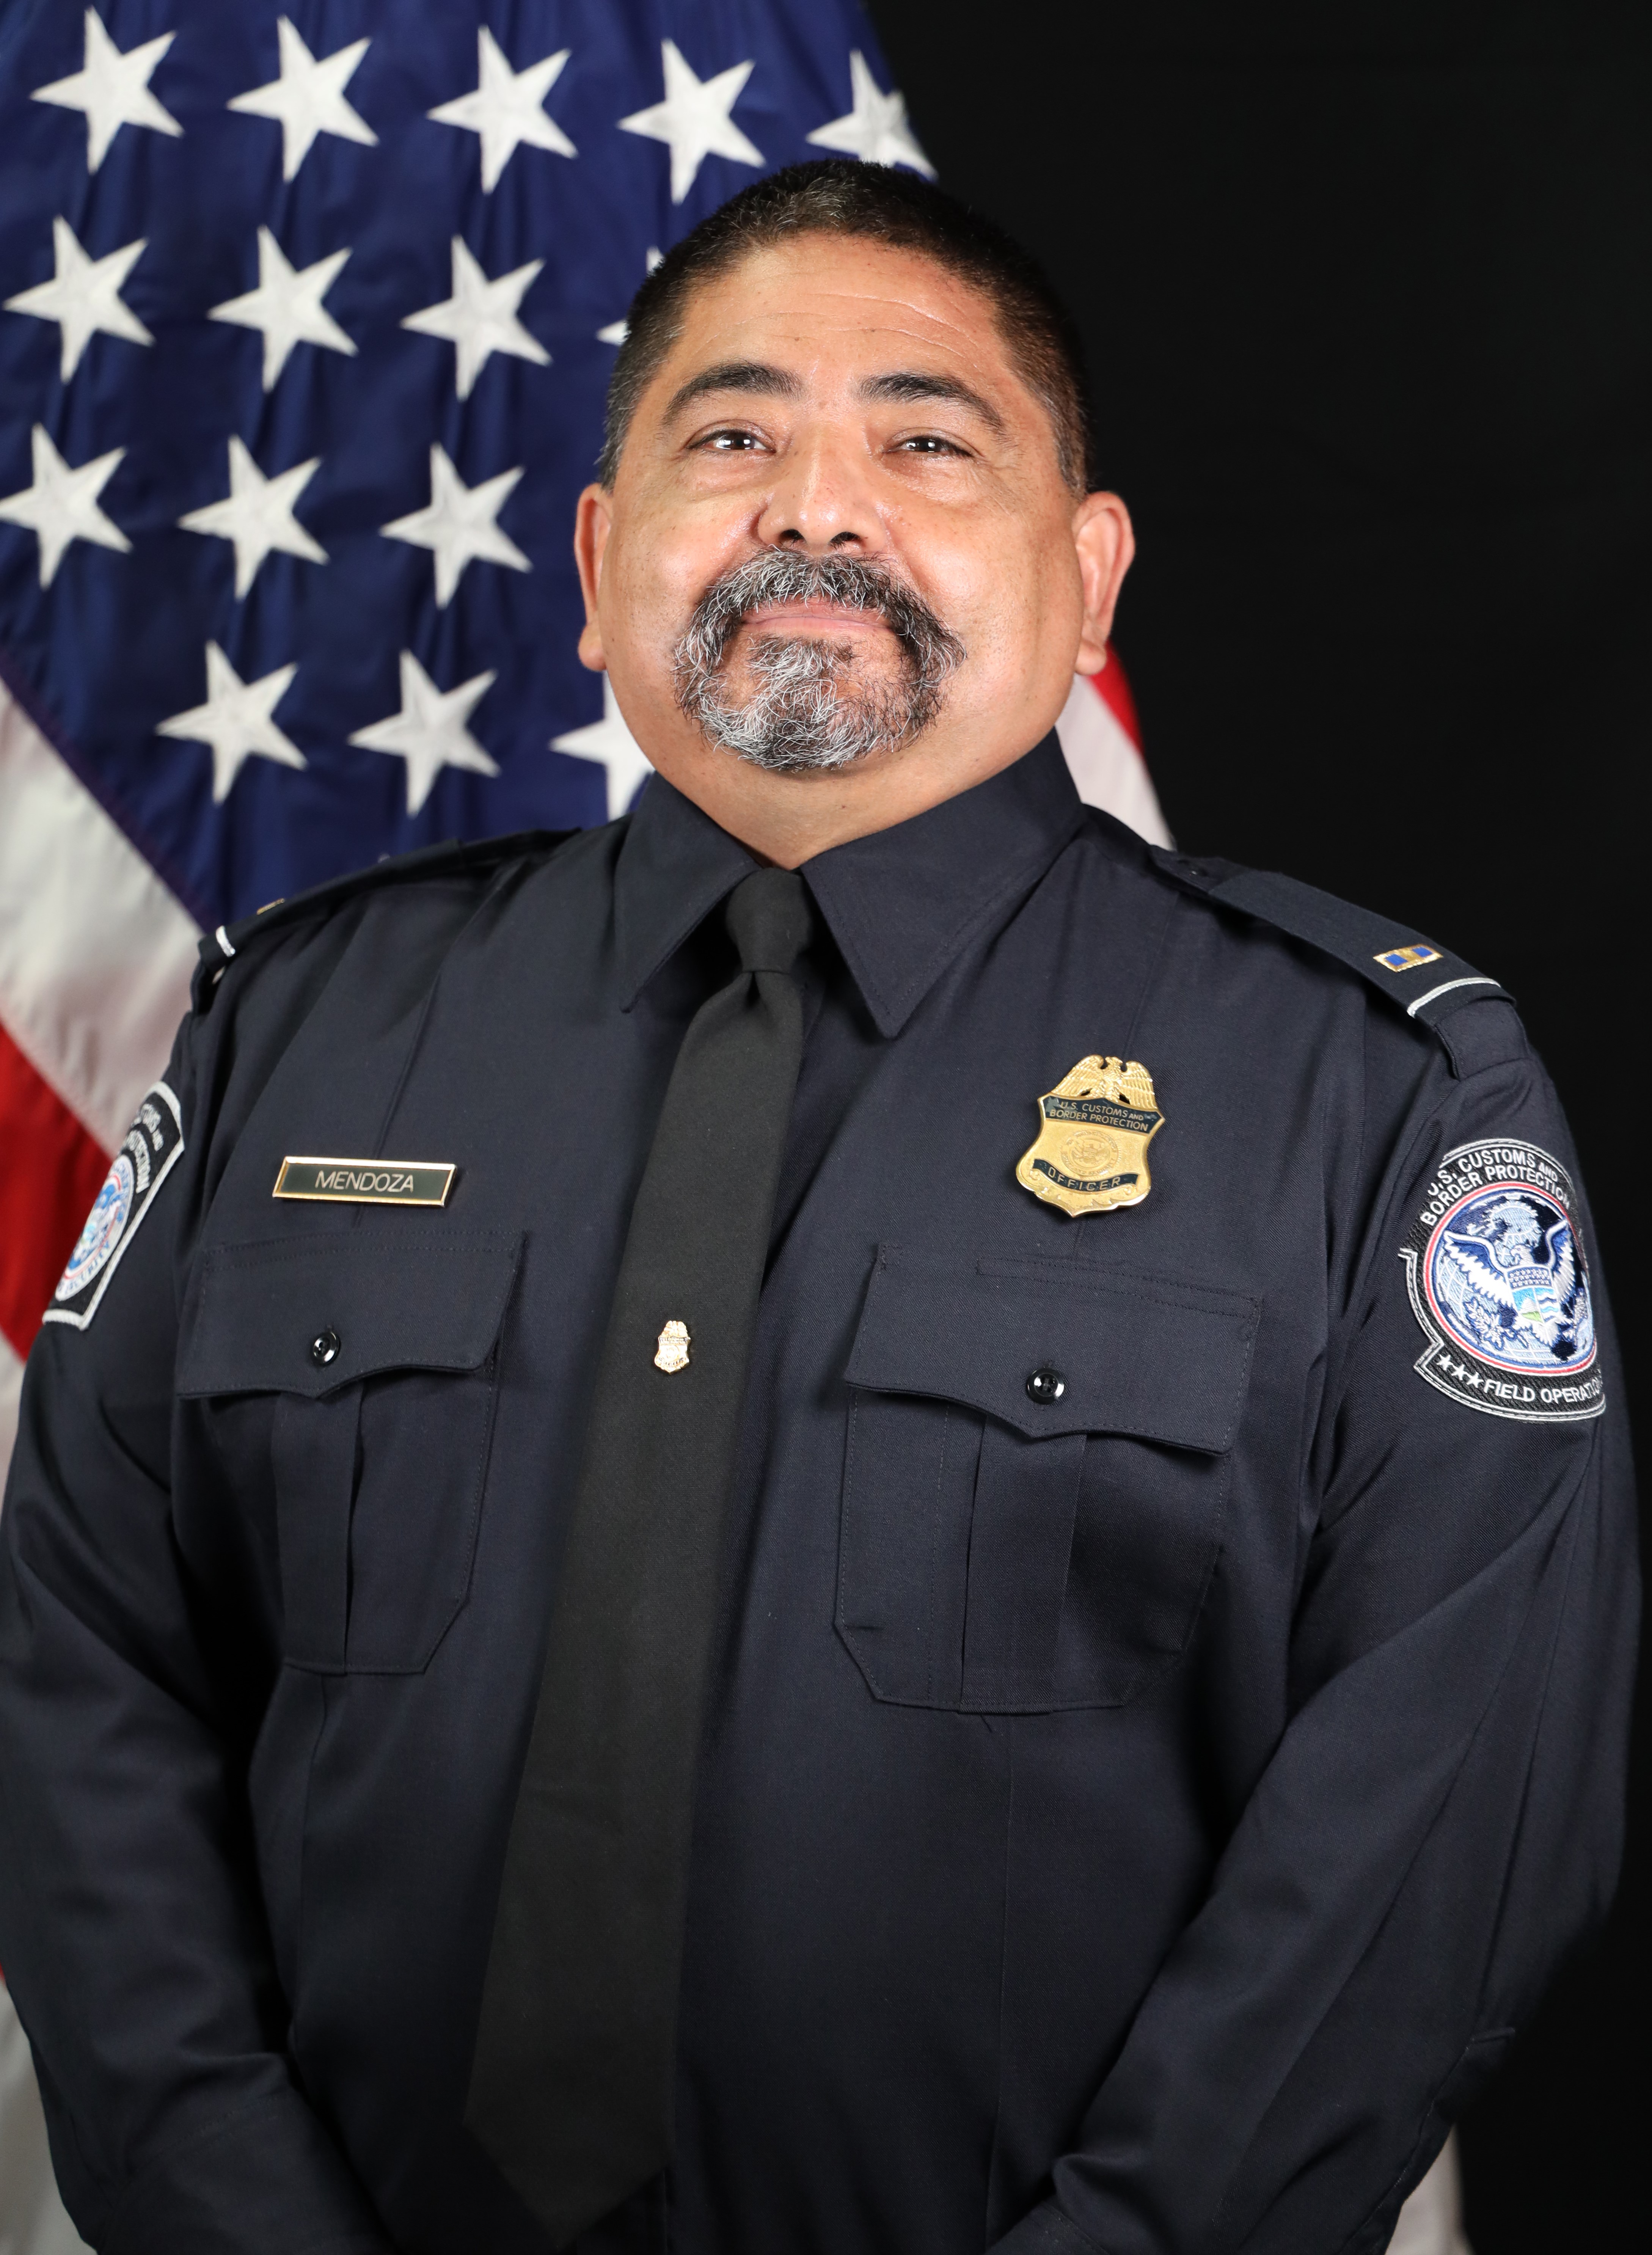 Officer Carlos C. Mendoza | United States Department of Homeland Security - Customs and Border Protection - Office of Field Operations, U.S. Government